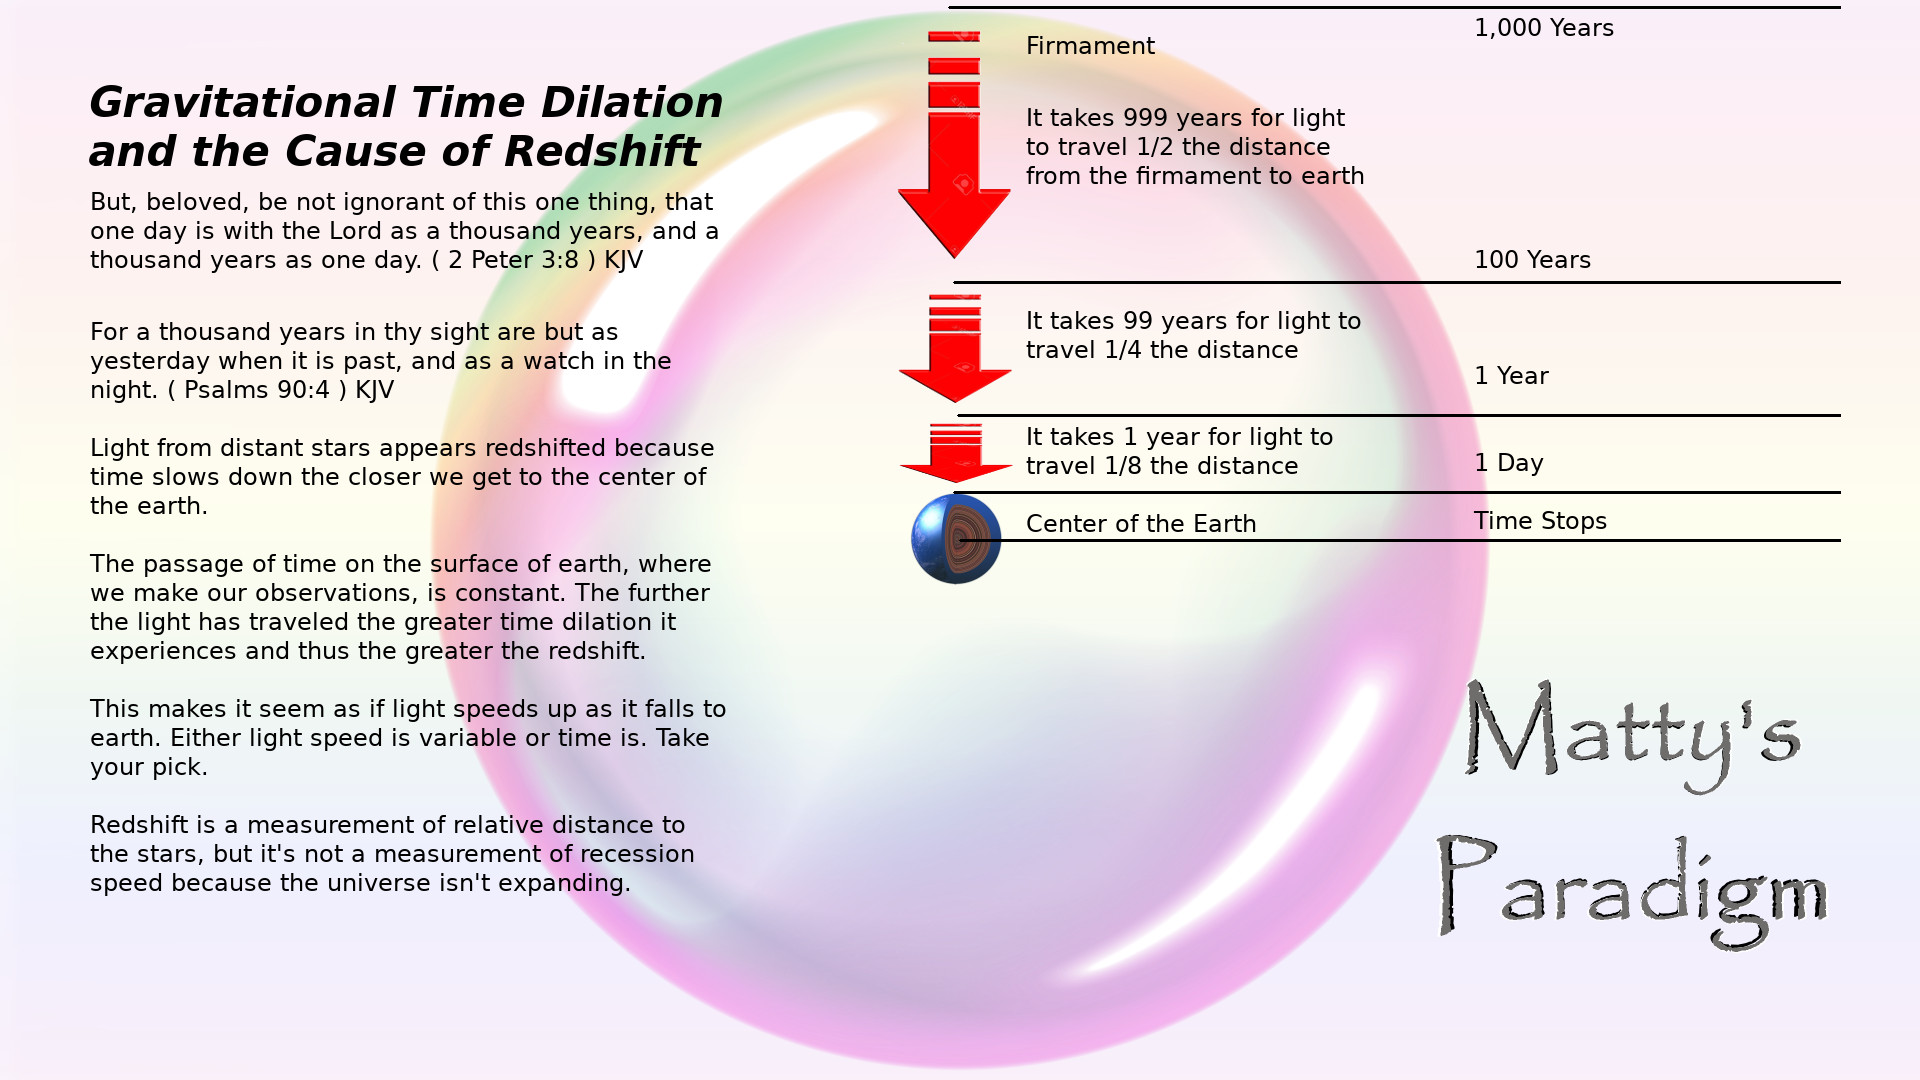 Diagram showing how gravitational time dilation can account for observed redshift